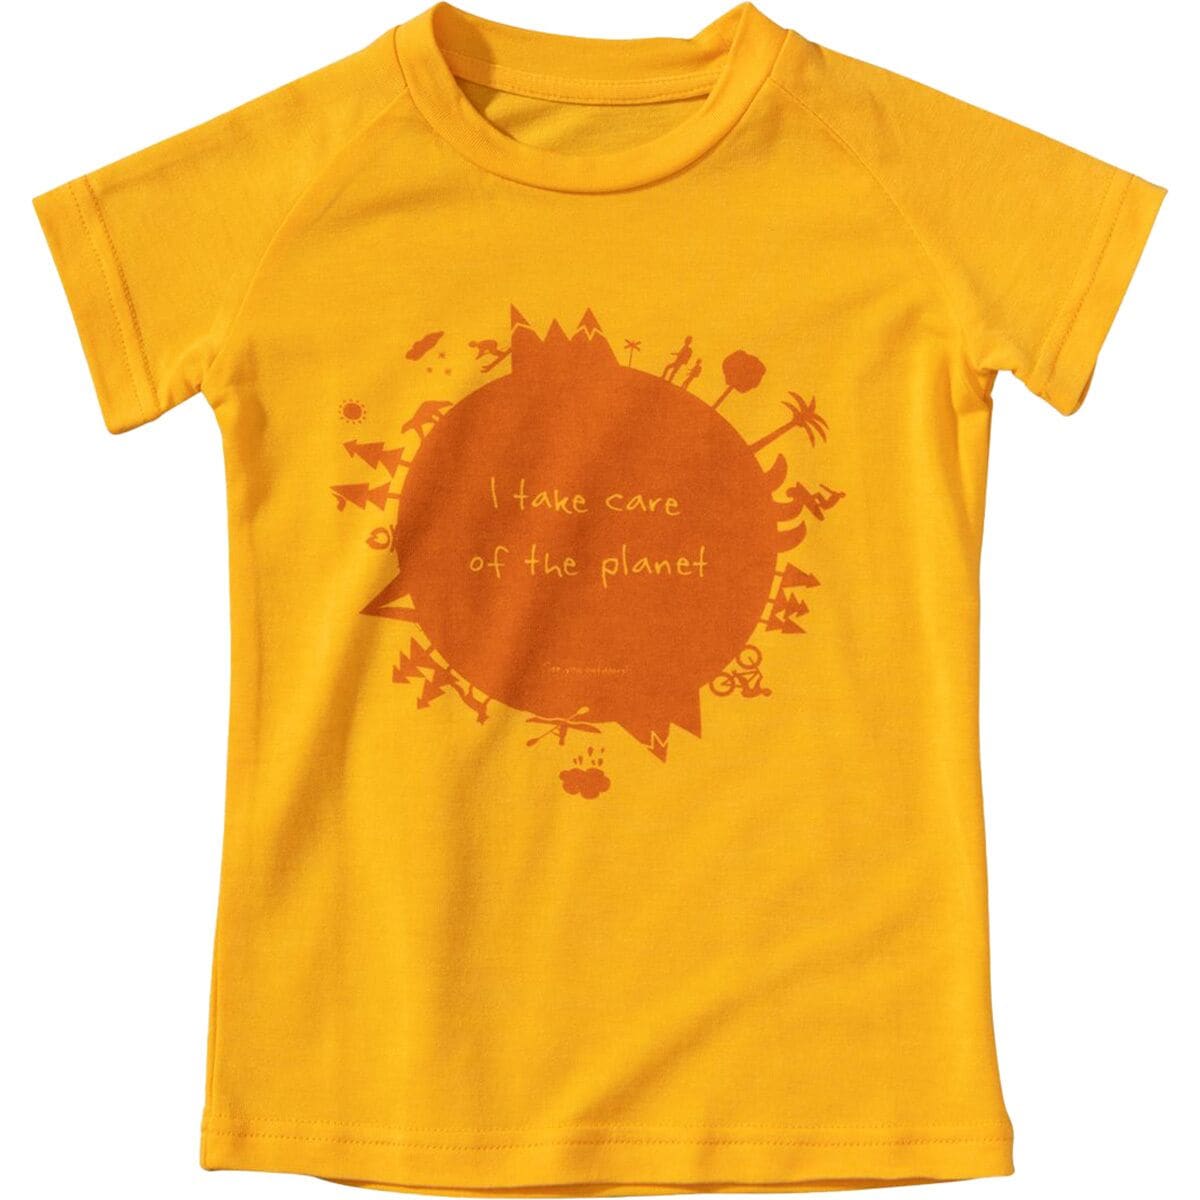 Isbjorn of Sweden Earth Short-Sleeve T-Shirt - Toddlers'